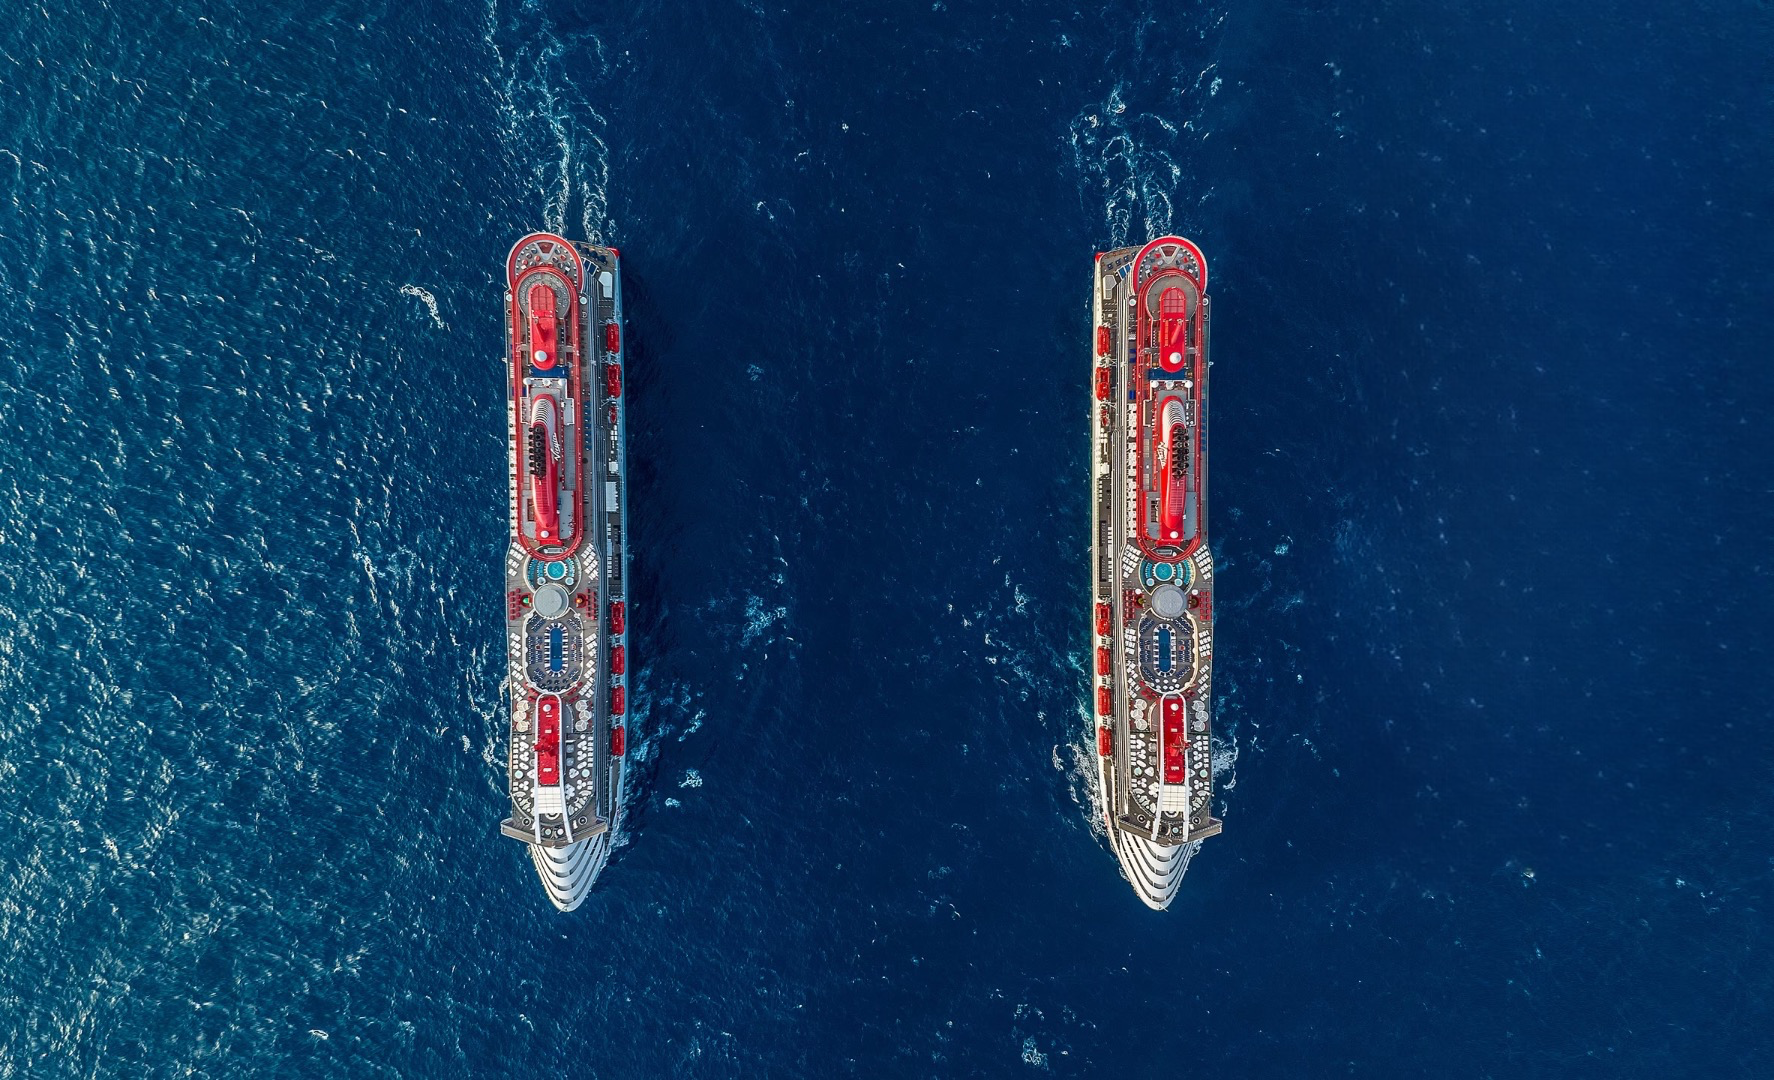 Virgin Voyages - Ships and Itineraries 2023, 2024, 2025